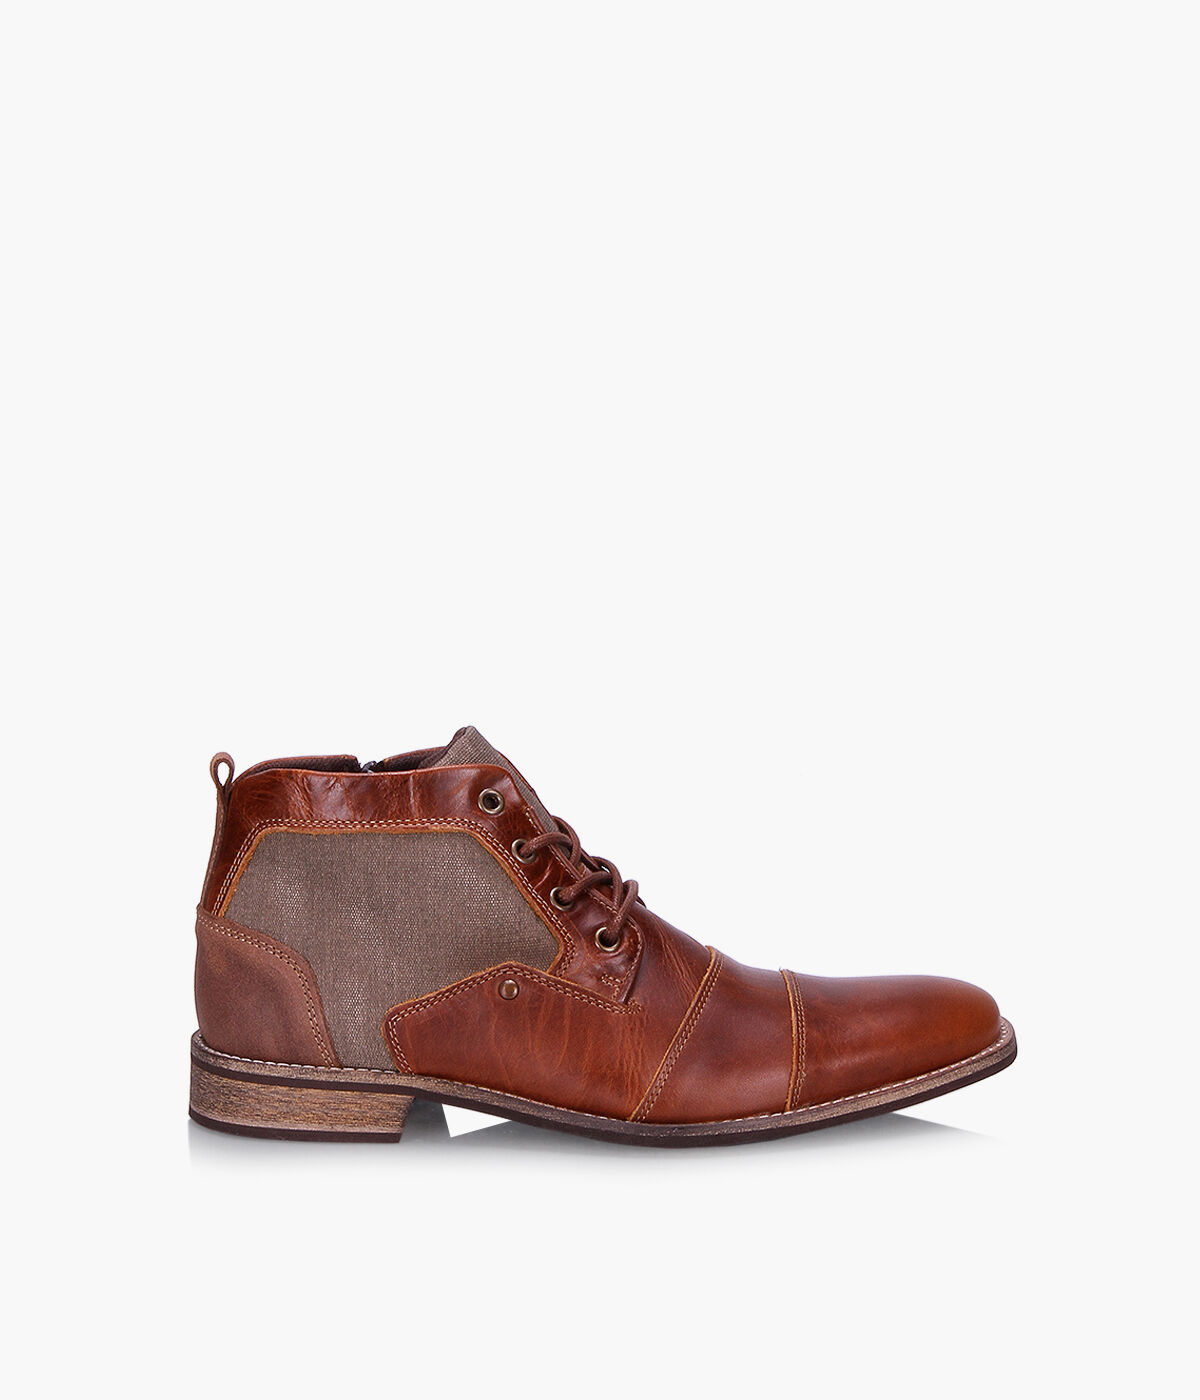 B2 2301545 - Leather | Browns Shoes